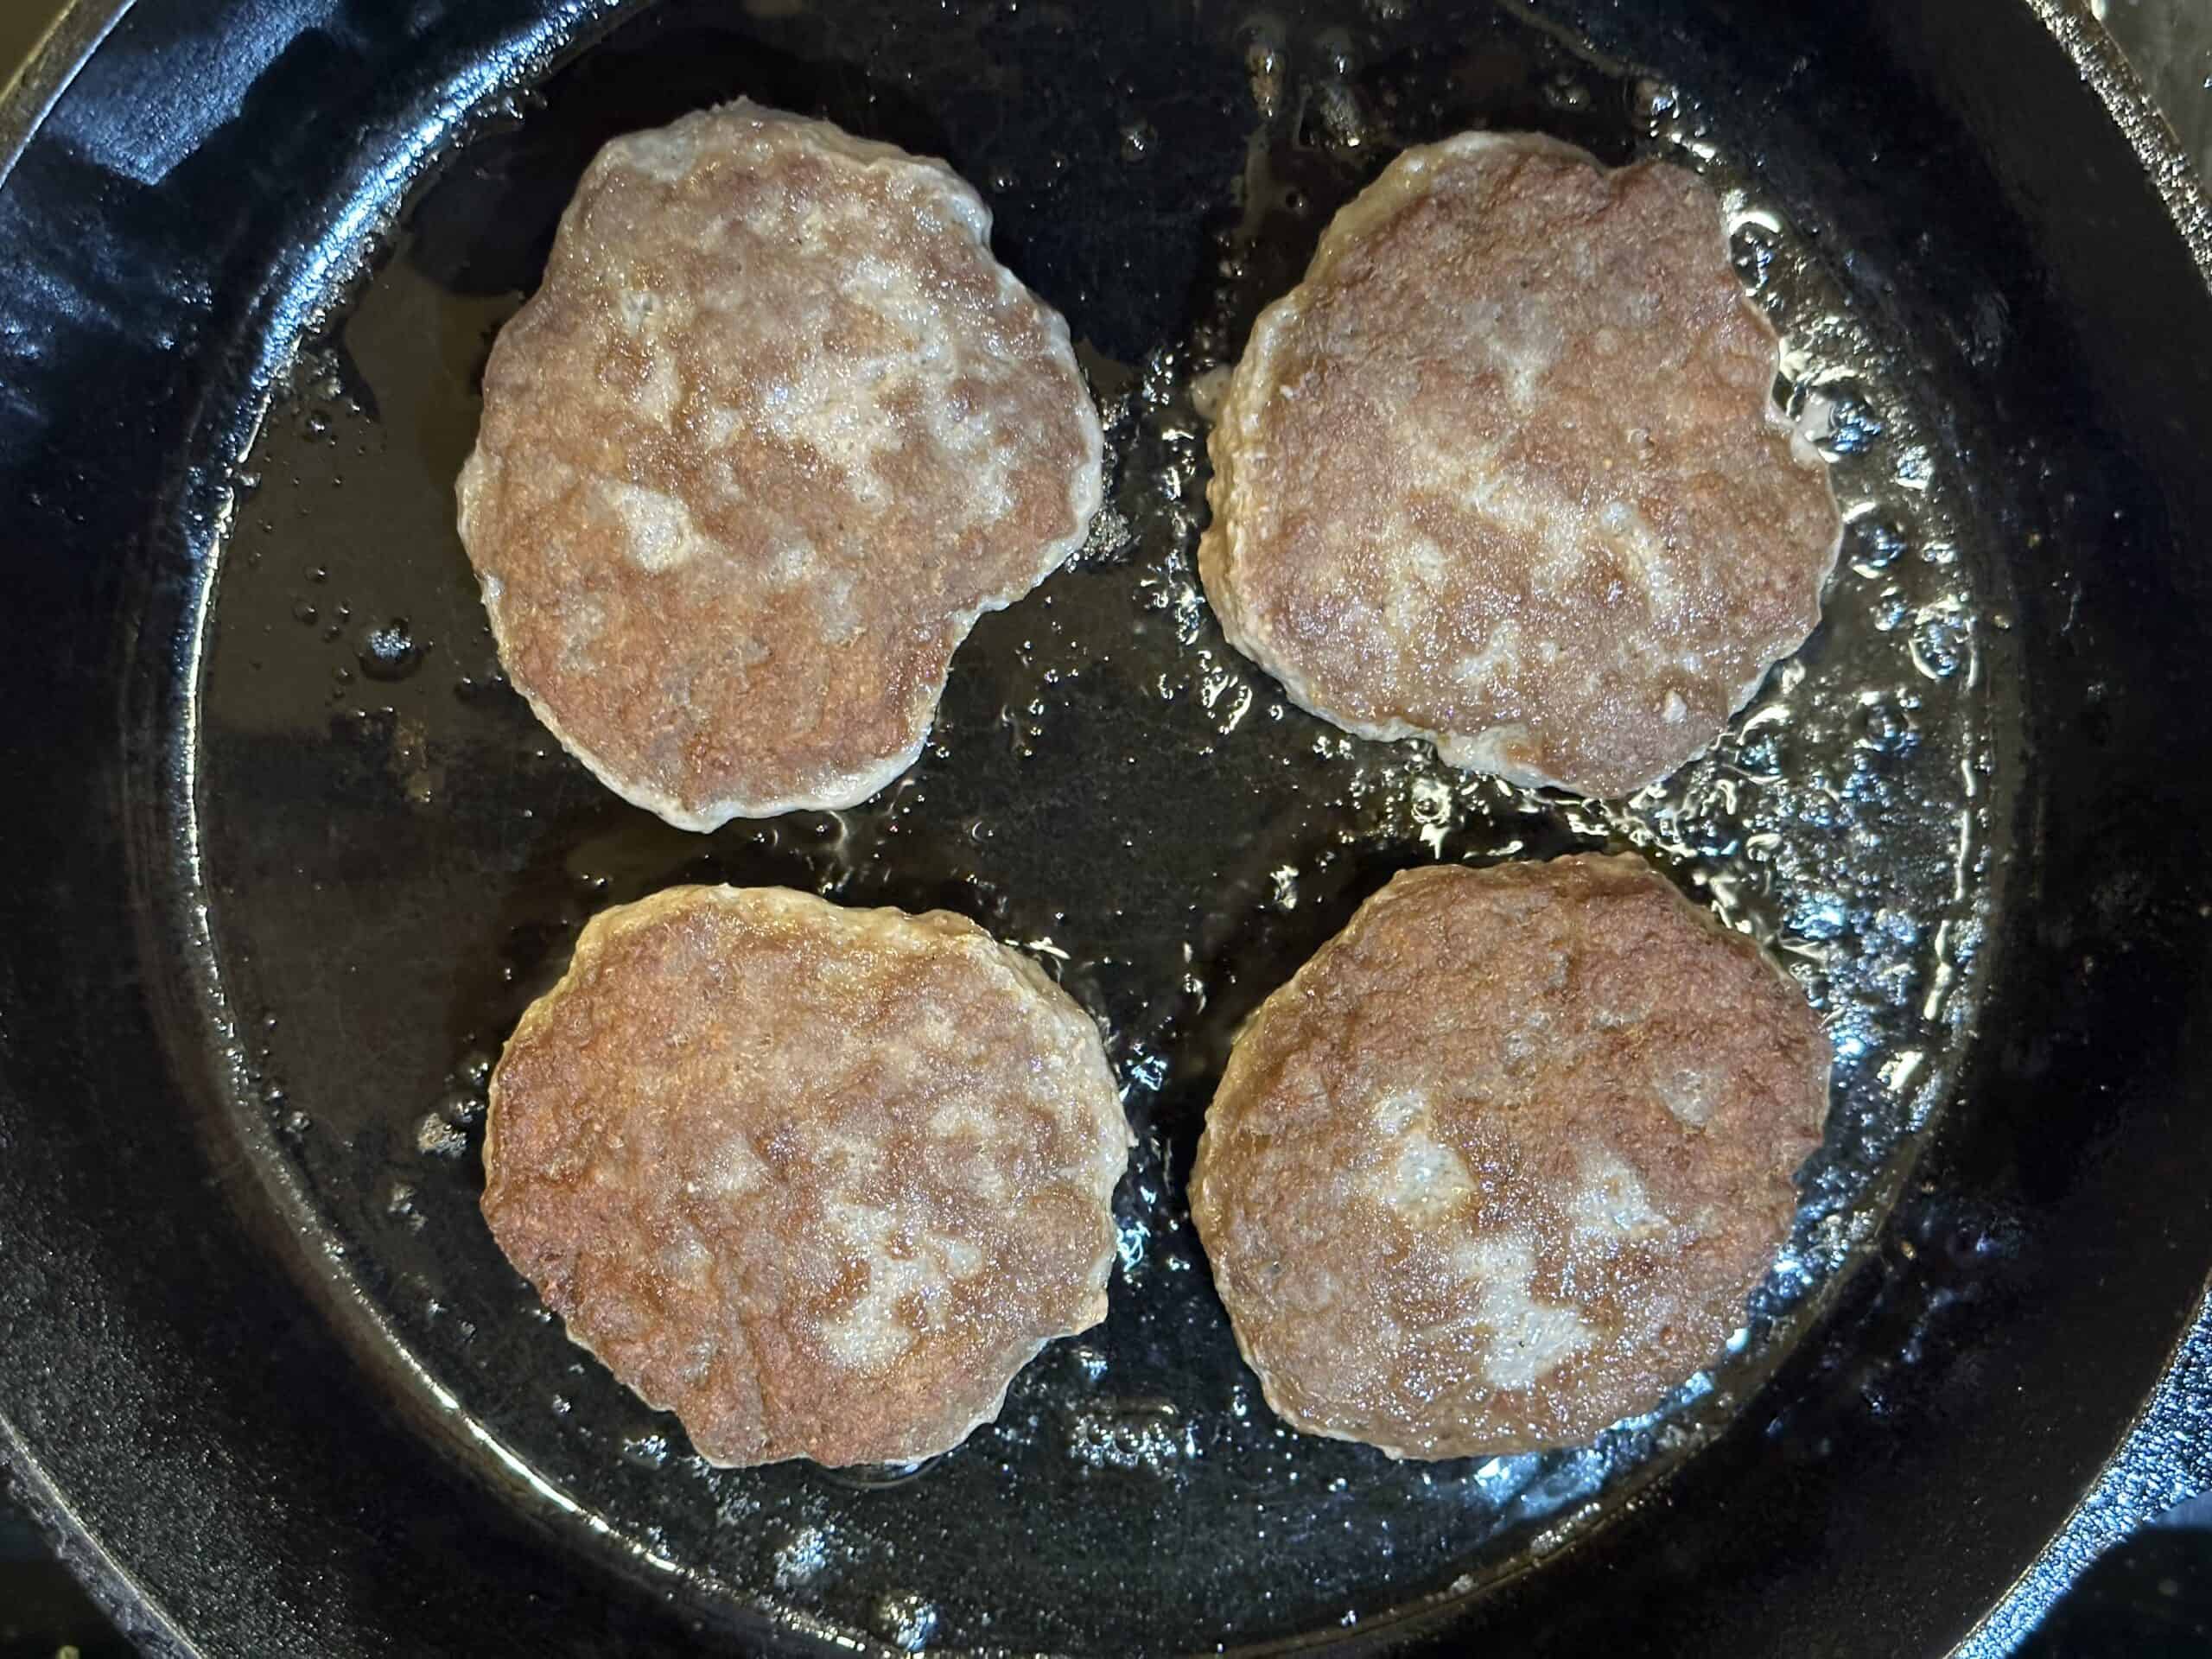 Patties are flipped for the other side to cook.